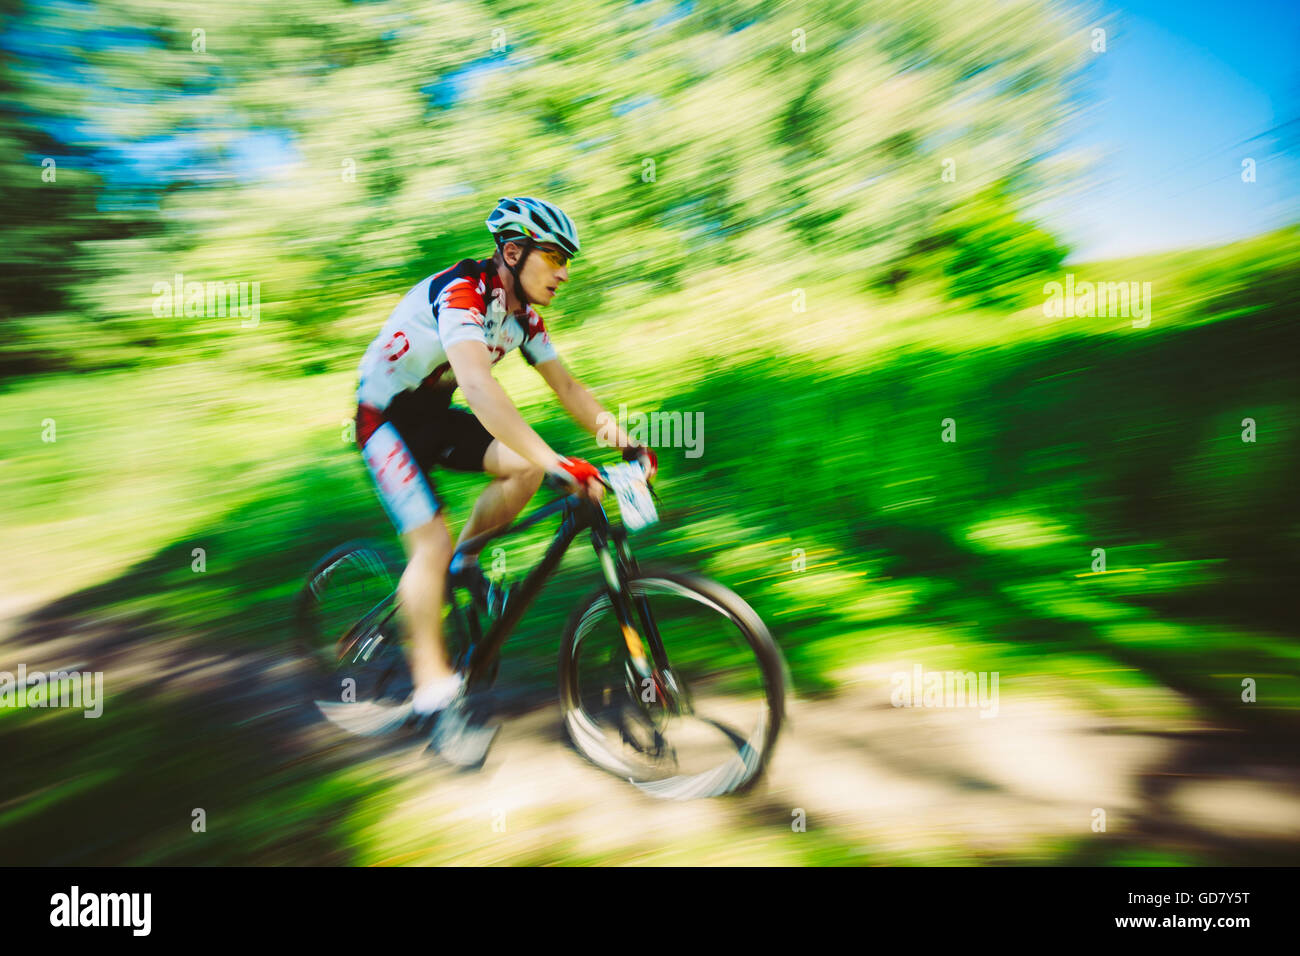 Mountain Bike cyclist riding track at sunny day, healthy lifestyle active athlete doing sport Stock Photo